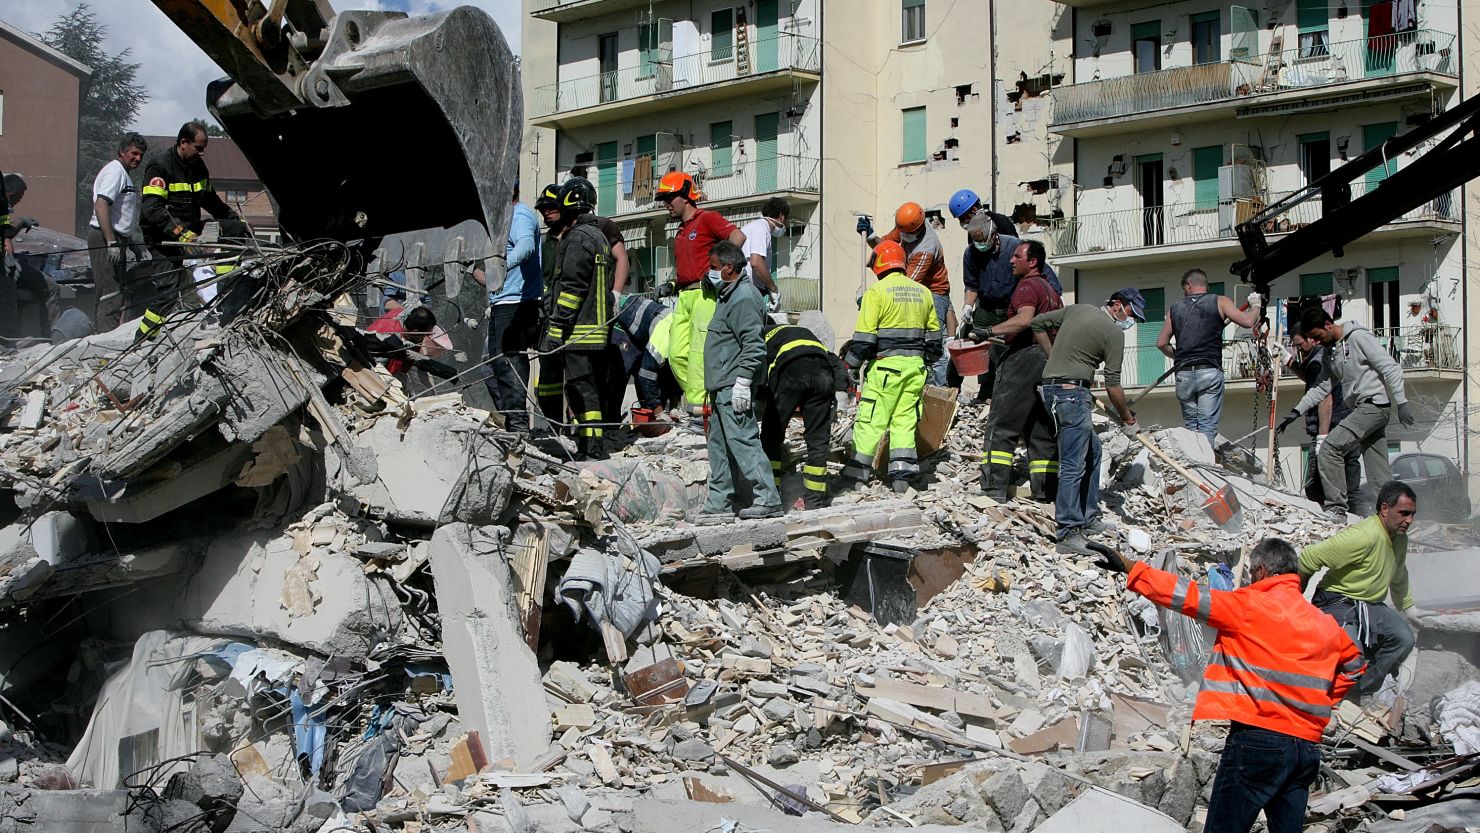 Rescue workers searched for bodies in the rubble of a destroyed building in L'Aquila, Italy, after a 6.3-magnitude earthquake tore through the region in April 2009. 